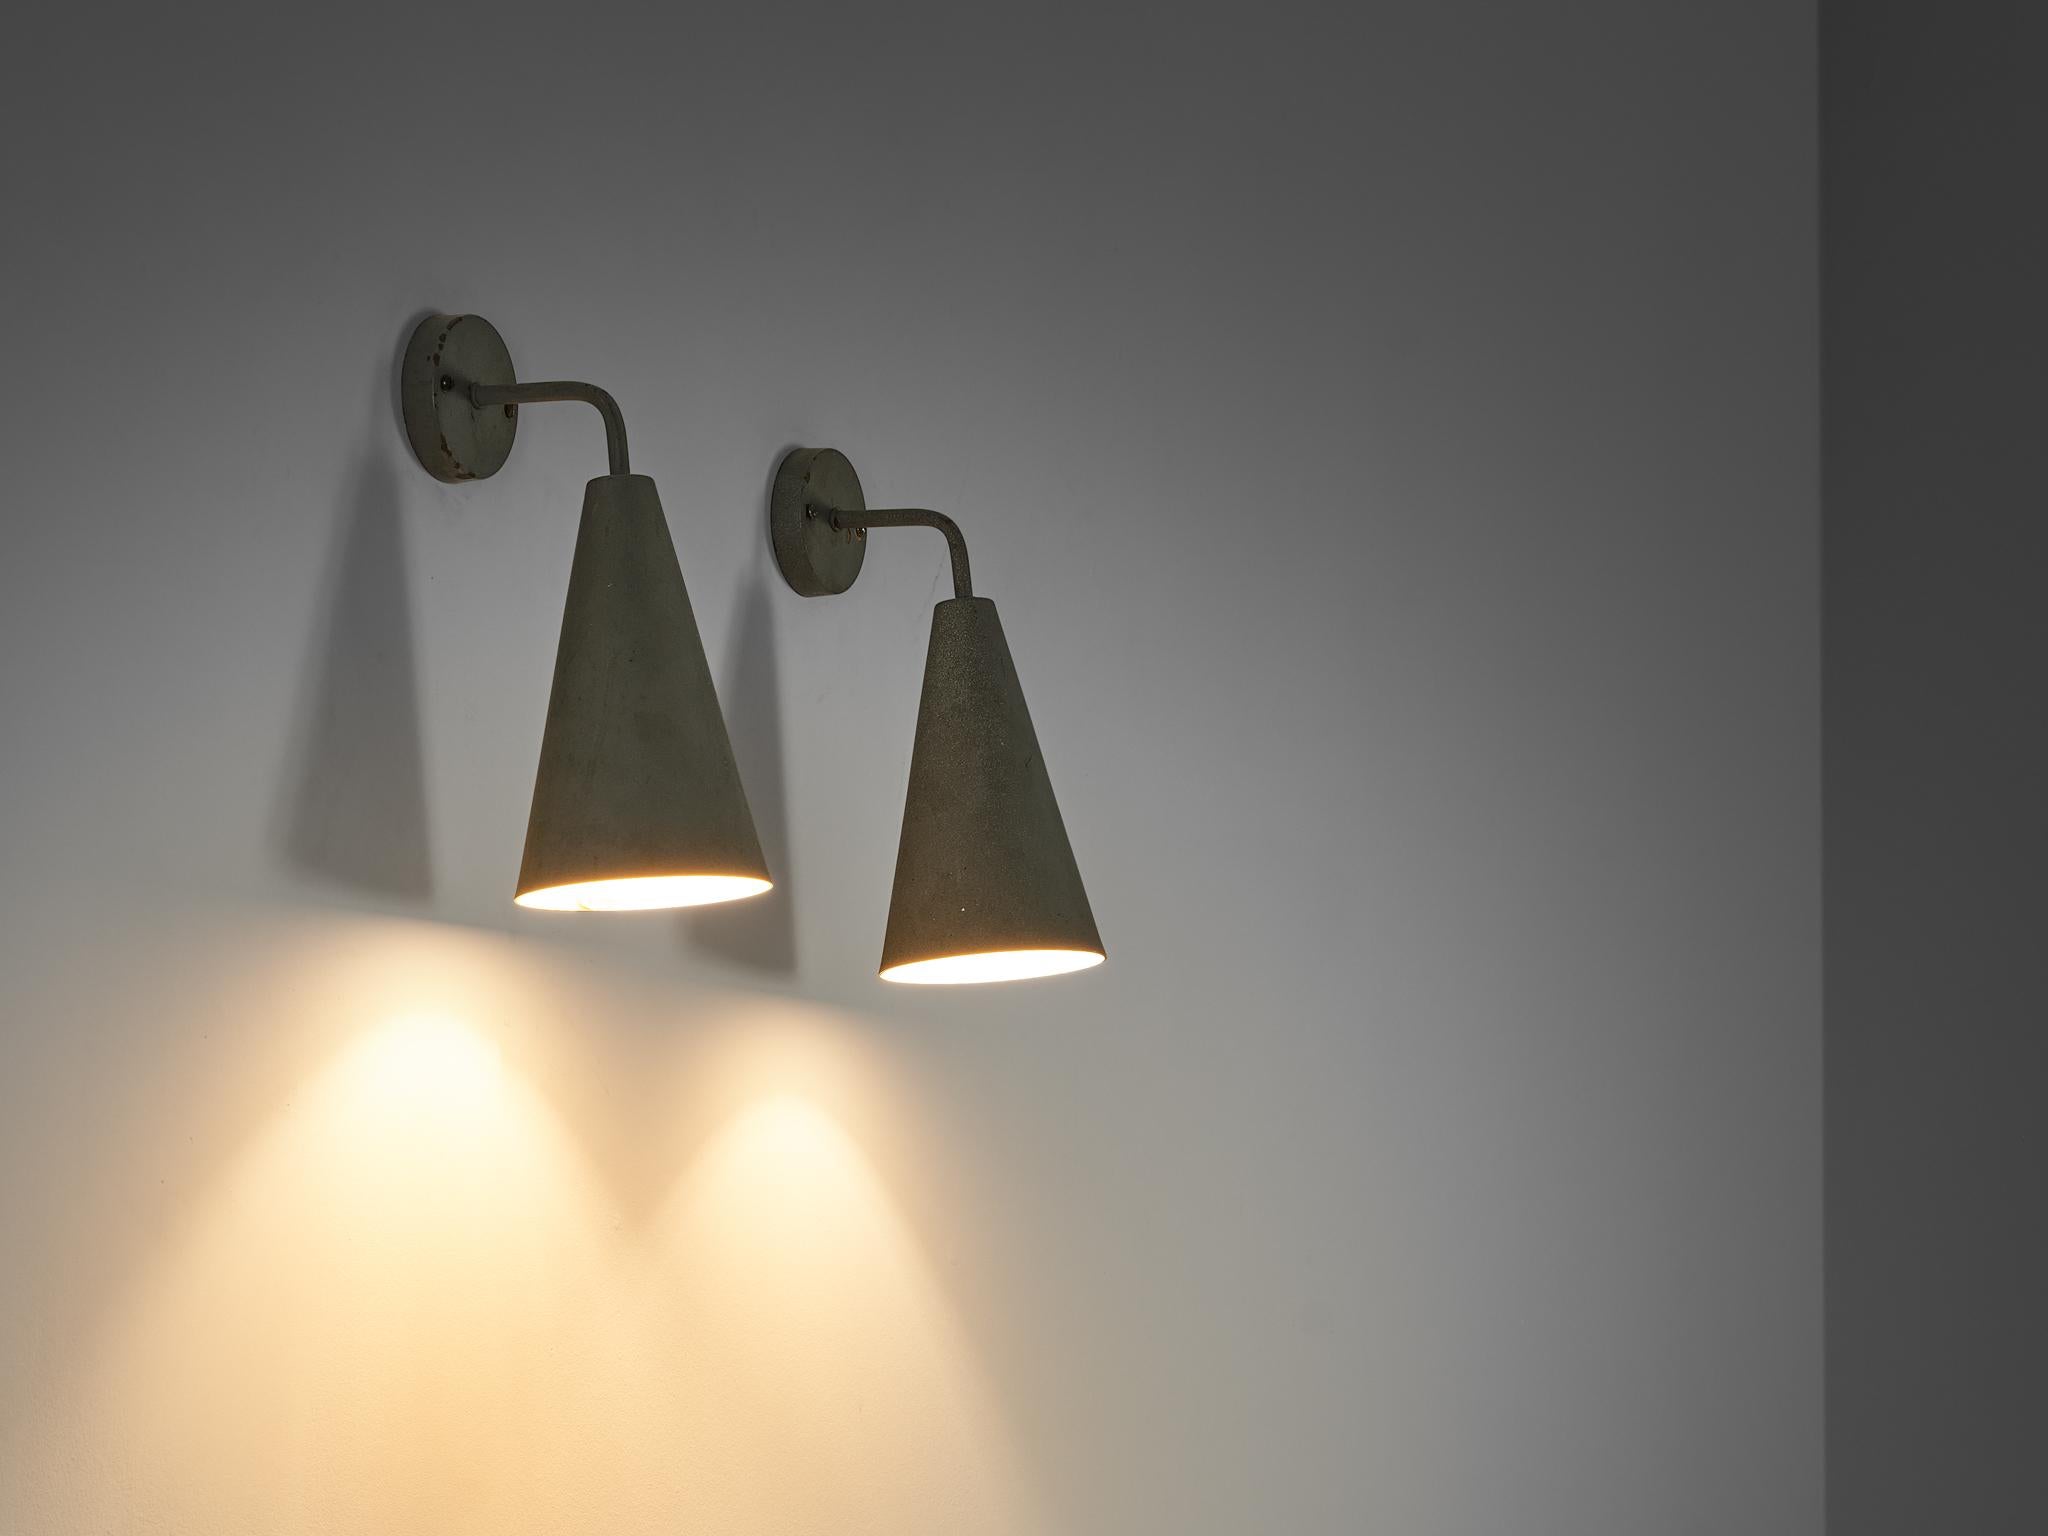 Hans Agne Jakobsson for Åhus, pair of wall lights, grey lacquered brass, Sweden, 1950s

These outdoor light by Swedish designer Hans-Agne Jakobsson feature a cone shaped lampshade that is connected to a circular fixation.  Jakobsson originally